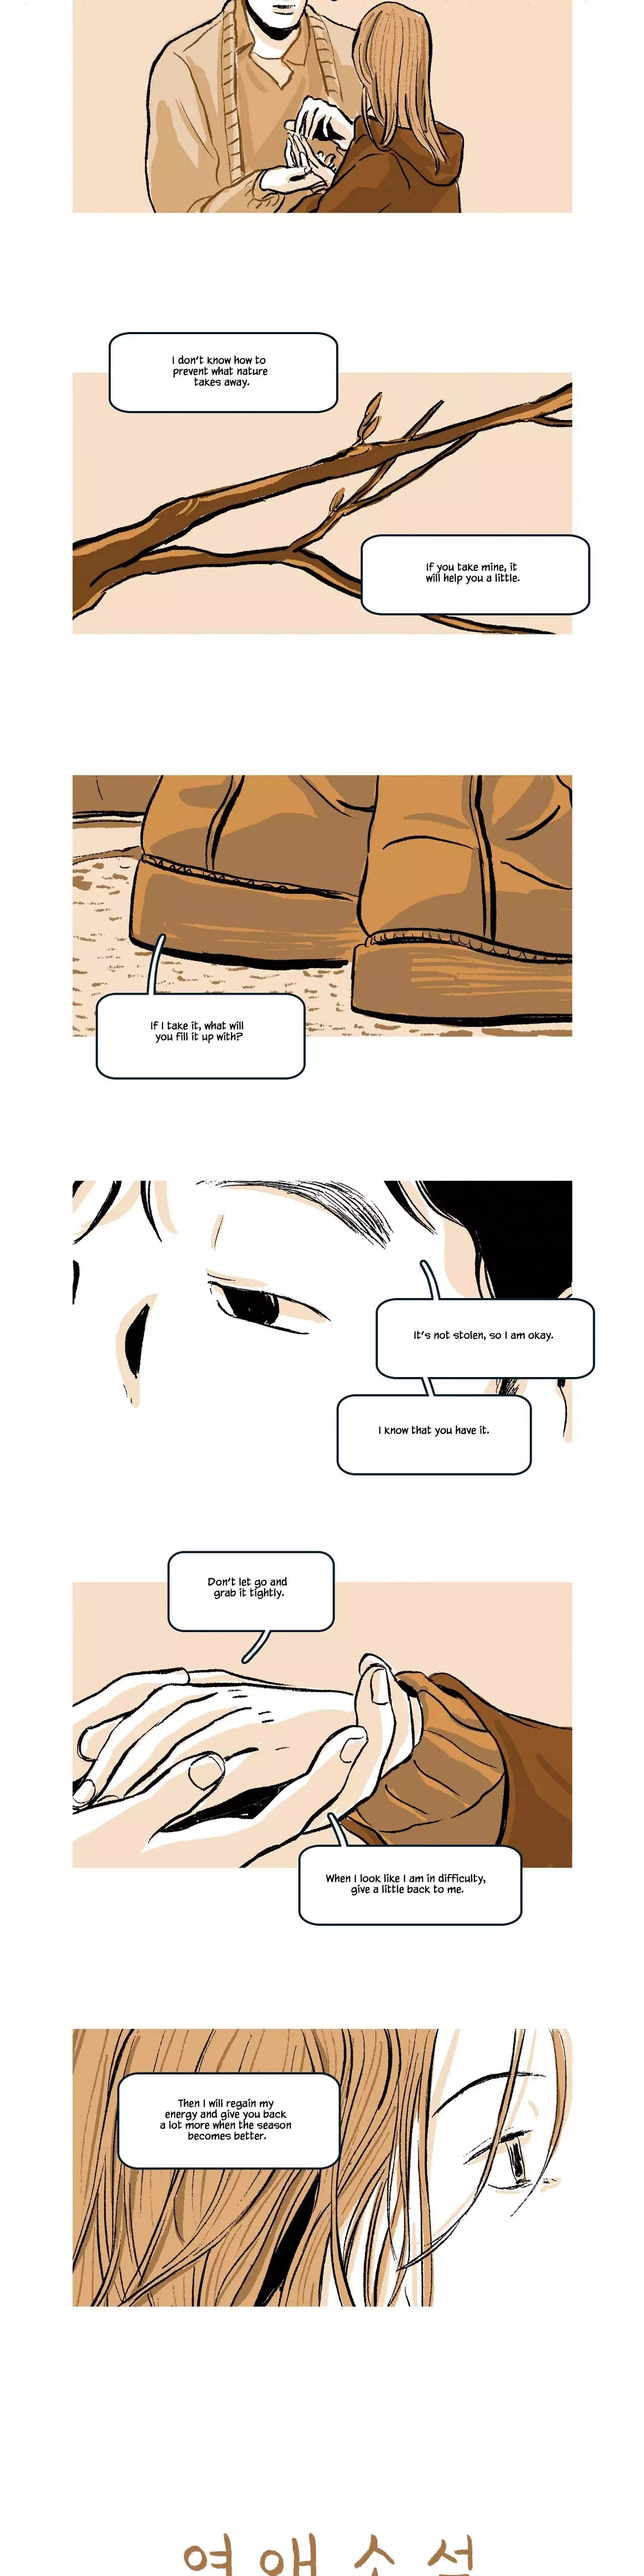 The Professor Who Reads Love Stories - 19 page 2-55a0ccb7